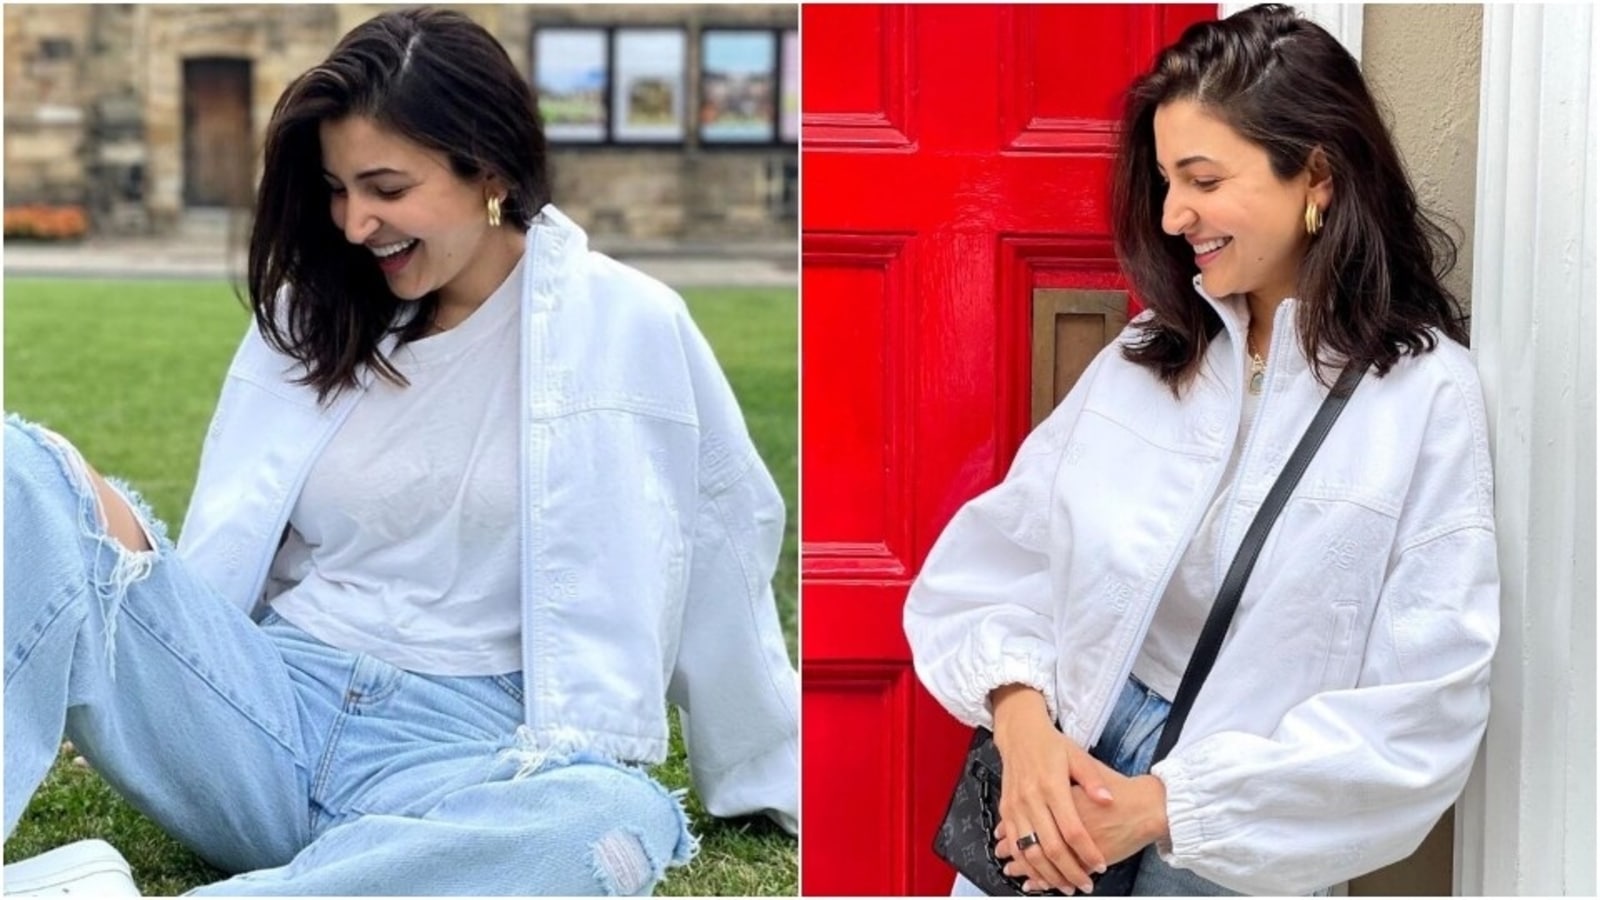 Anushka Sharma on X: Selfies in the sun with my favorite @LavieWorld bags!  Don't forget to splurge on some jaw-dropping deals on Lavie during  @Flipkart #TheBigBillionDays #FickleIsFun #LaviexAnushka #LavieLoving  #LavieWorld #ad  /